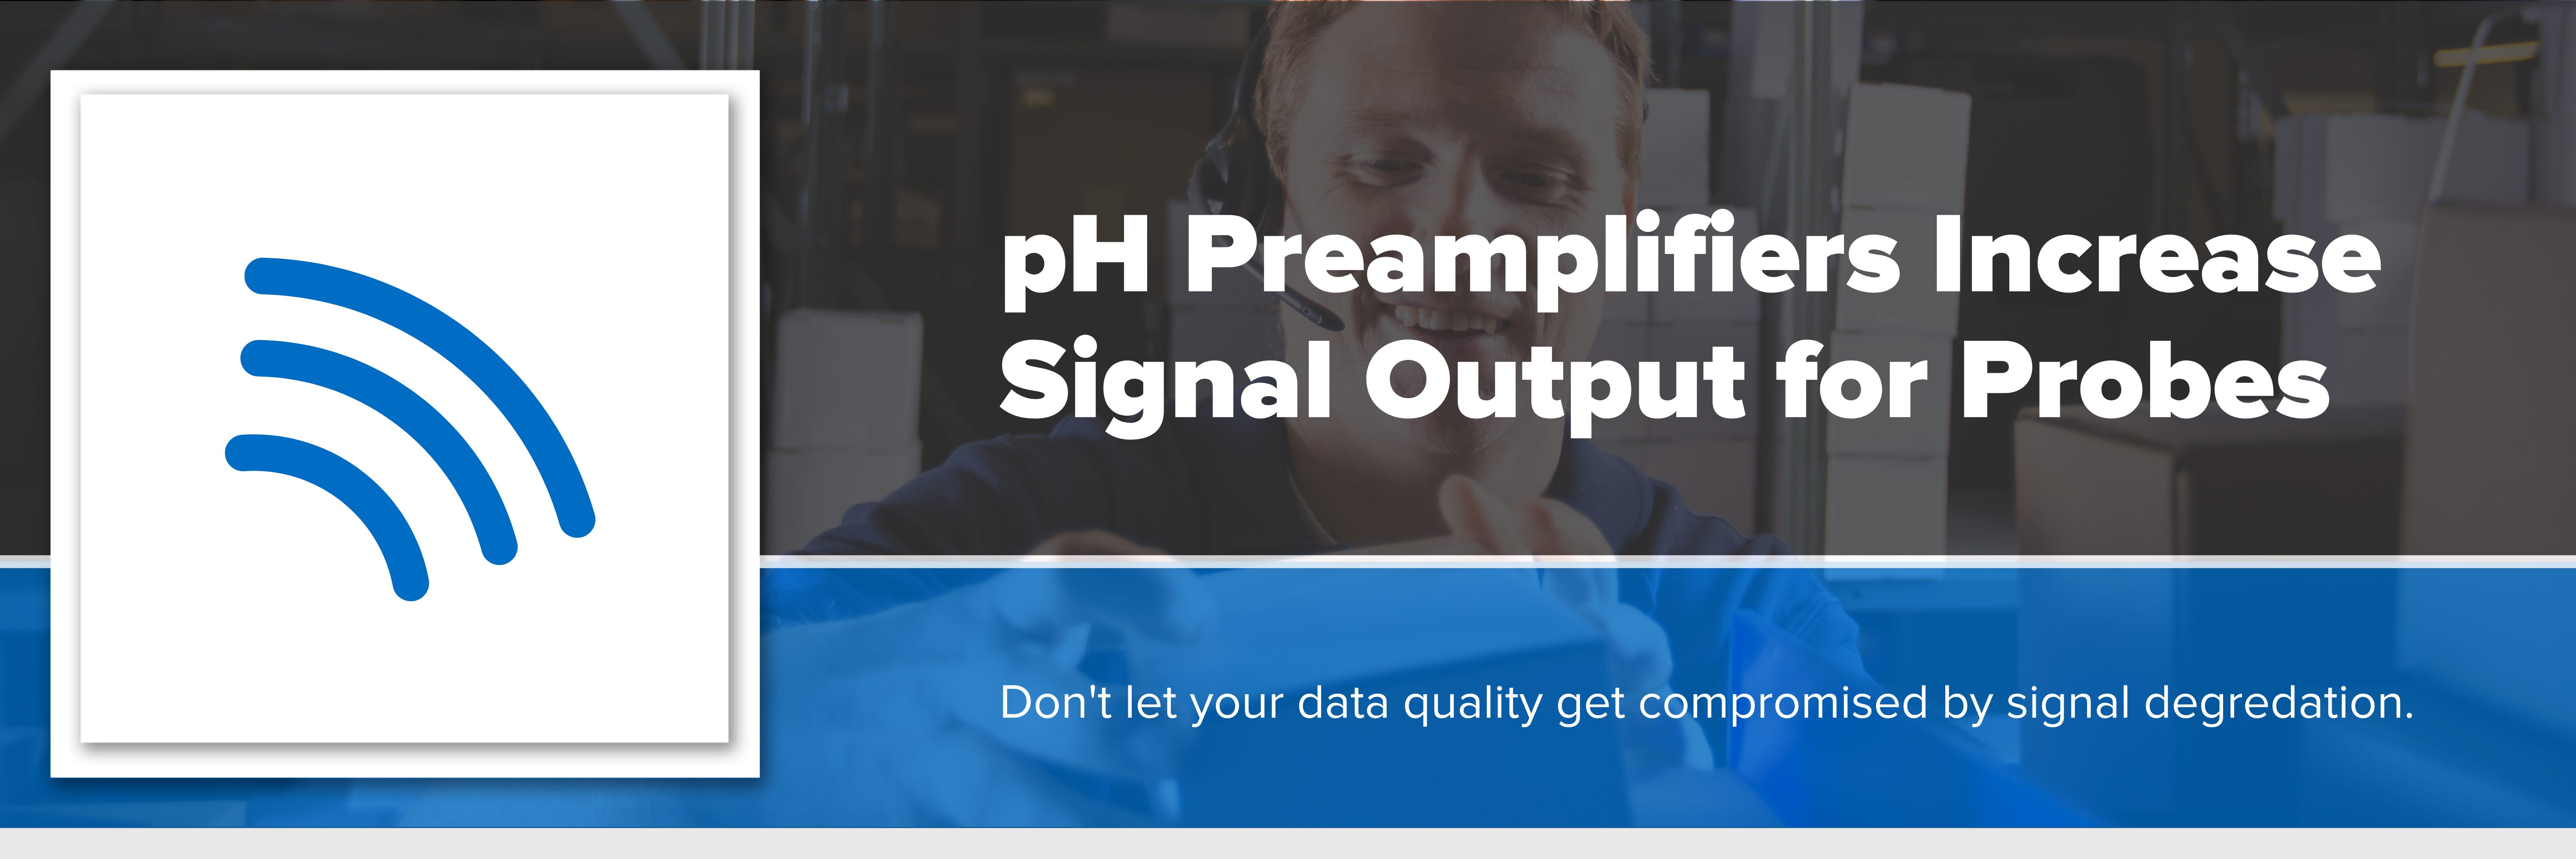 Header image with text "pH Preamplifiers Increase Signal Output for Probes."